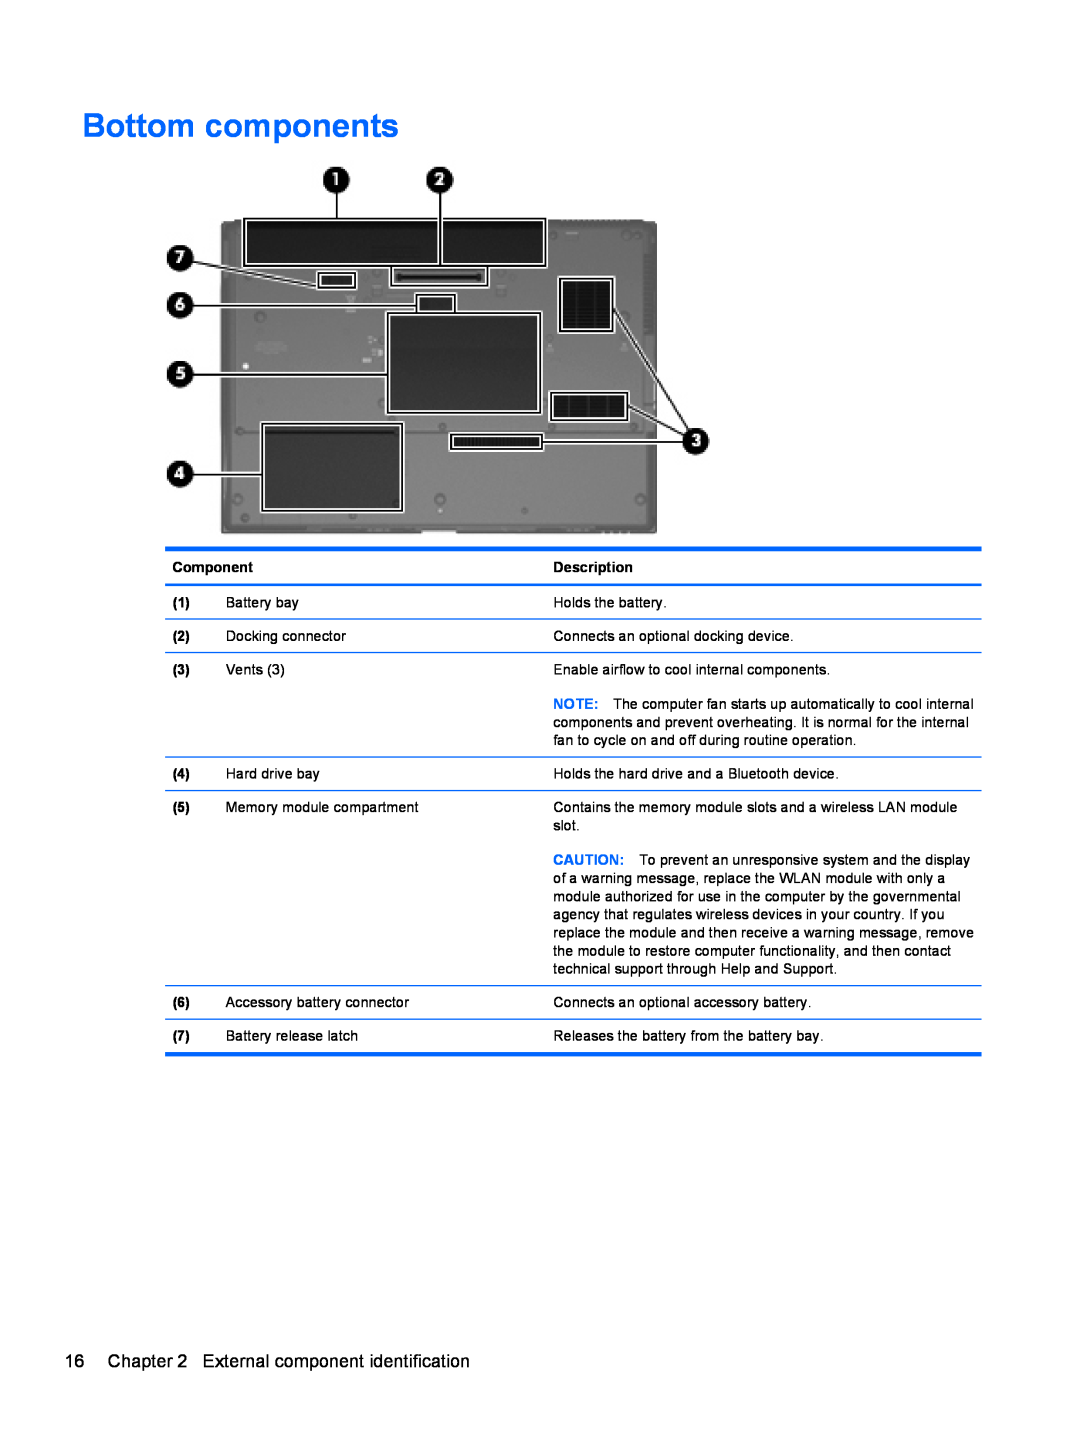 HP FN038UAABA, FN037UAABA manual Bottom components, External component identification 